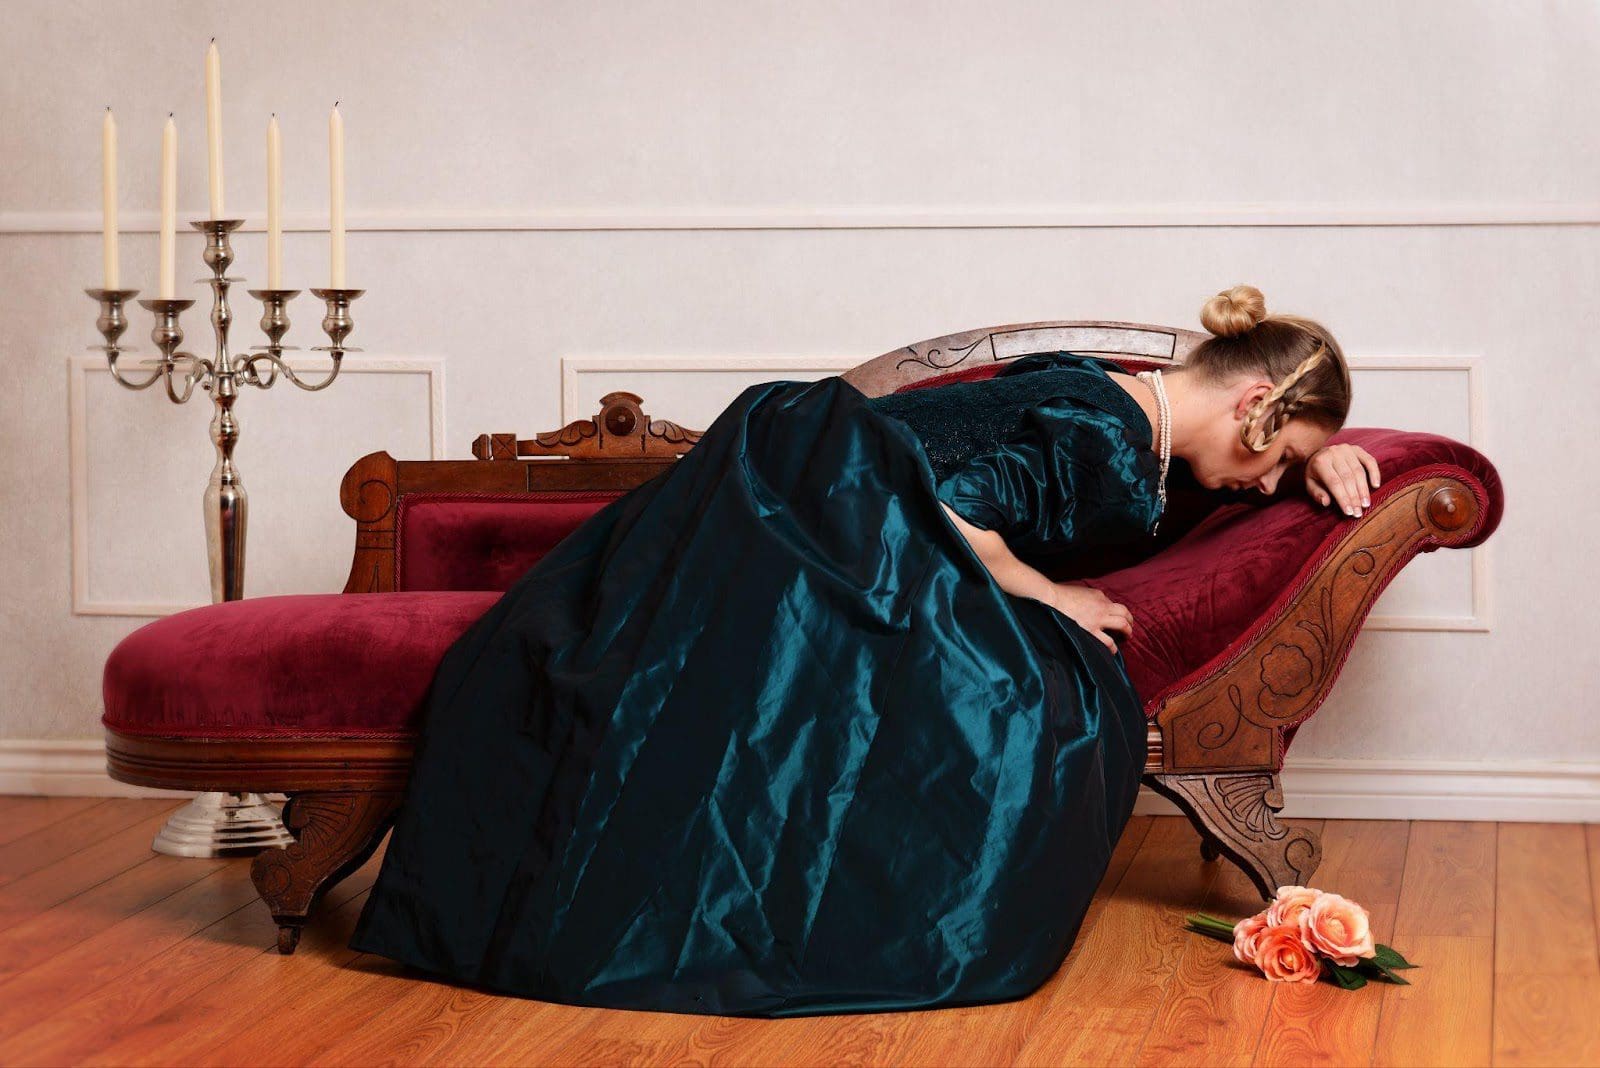 Victorian woman on a fainting couch.